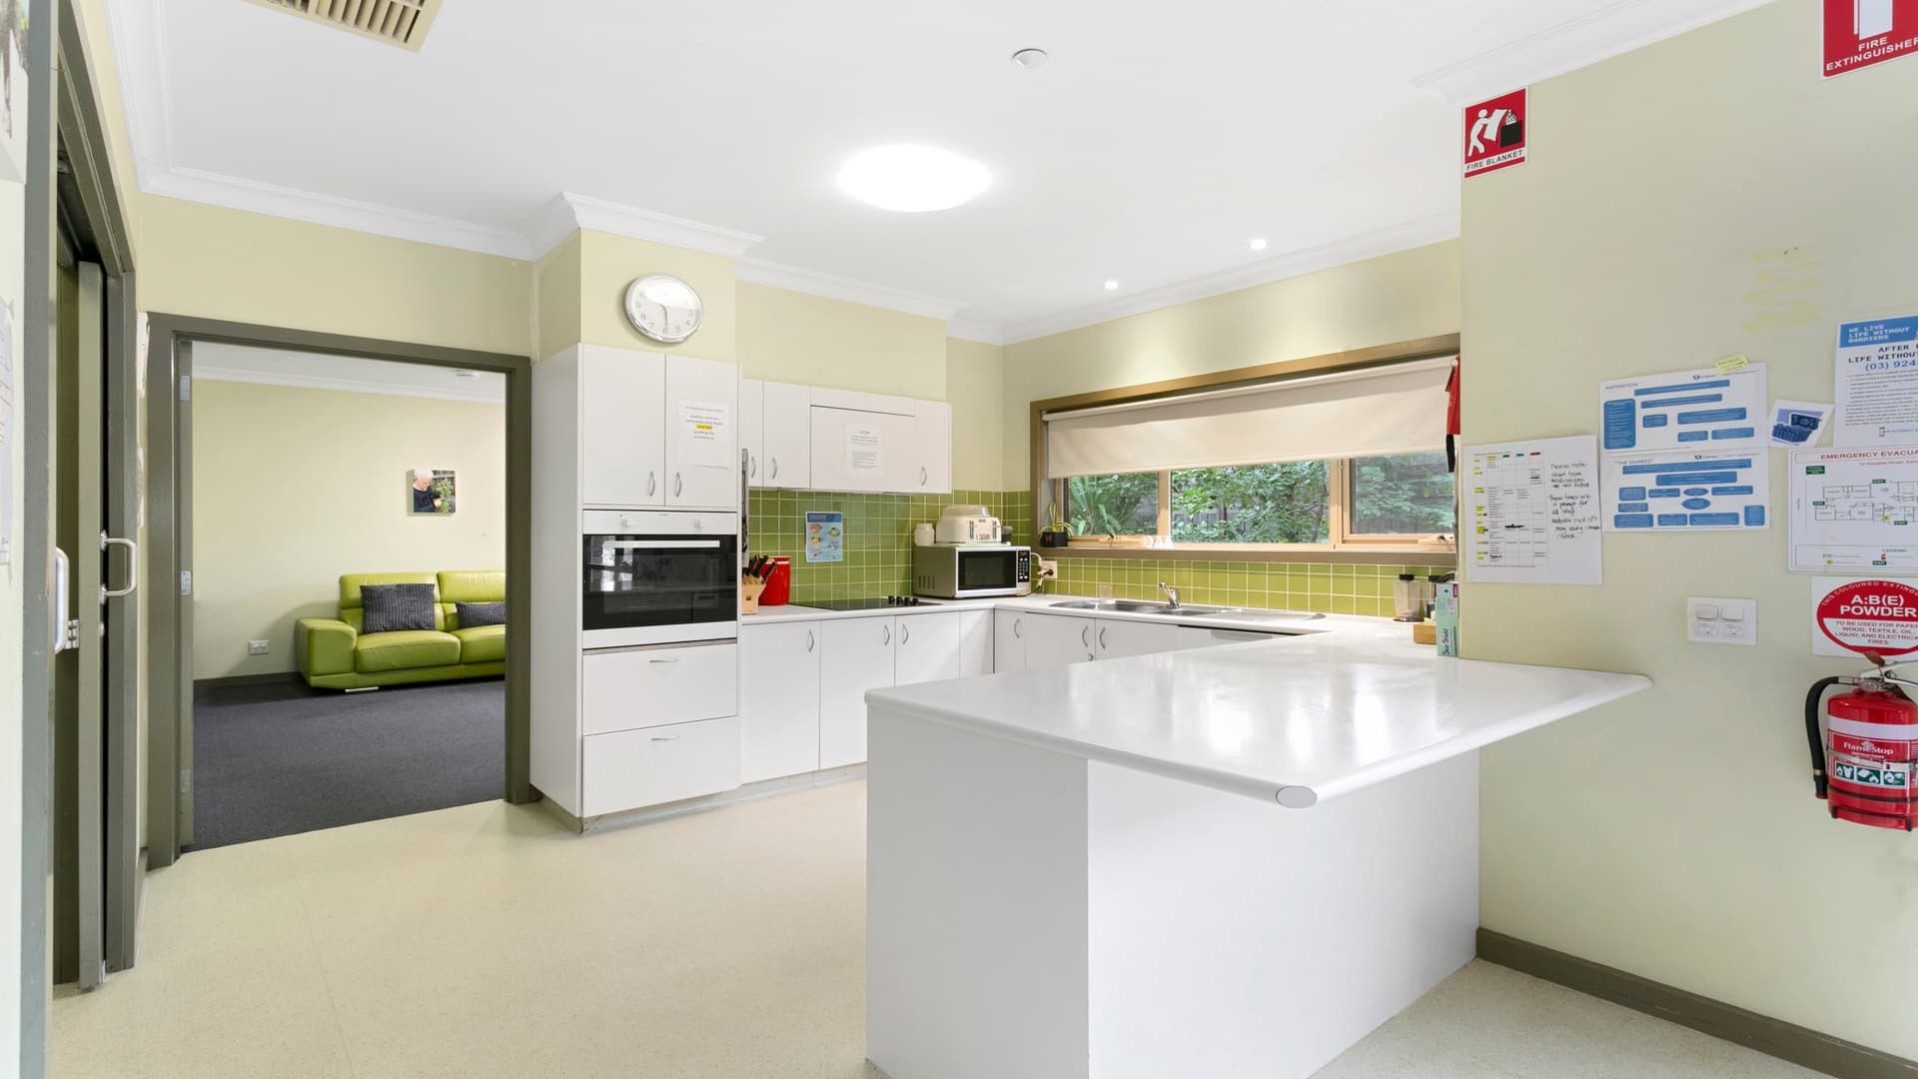 Open plan kitchen with white benchtops and green splash back.  Includes oven, microwave and stove top.